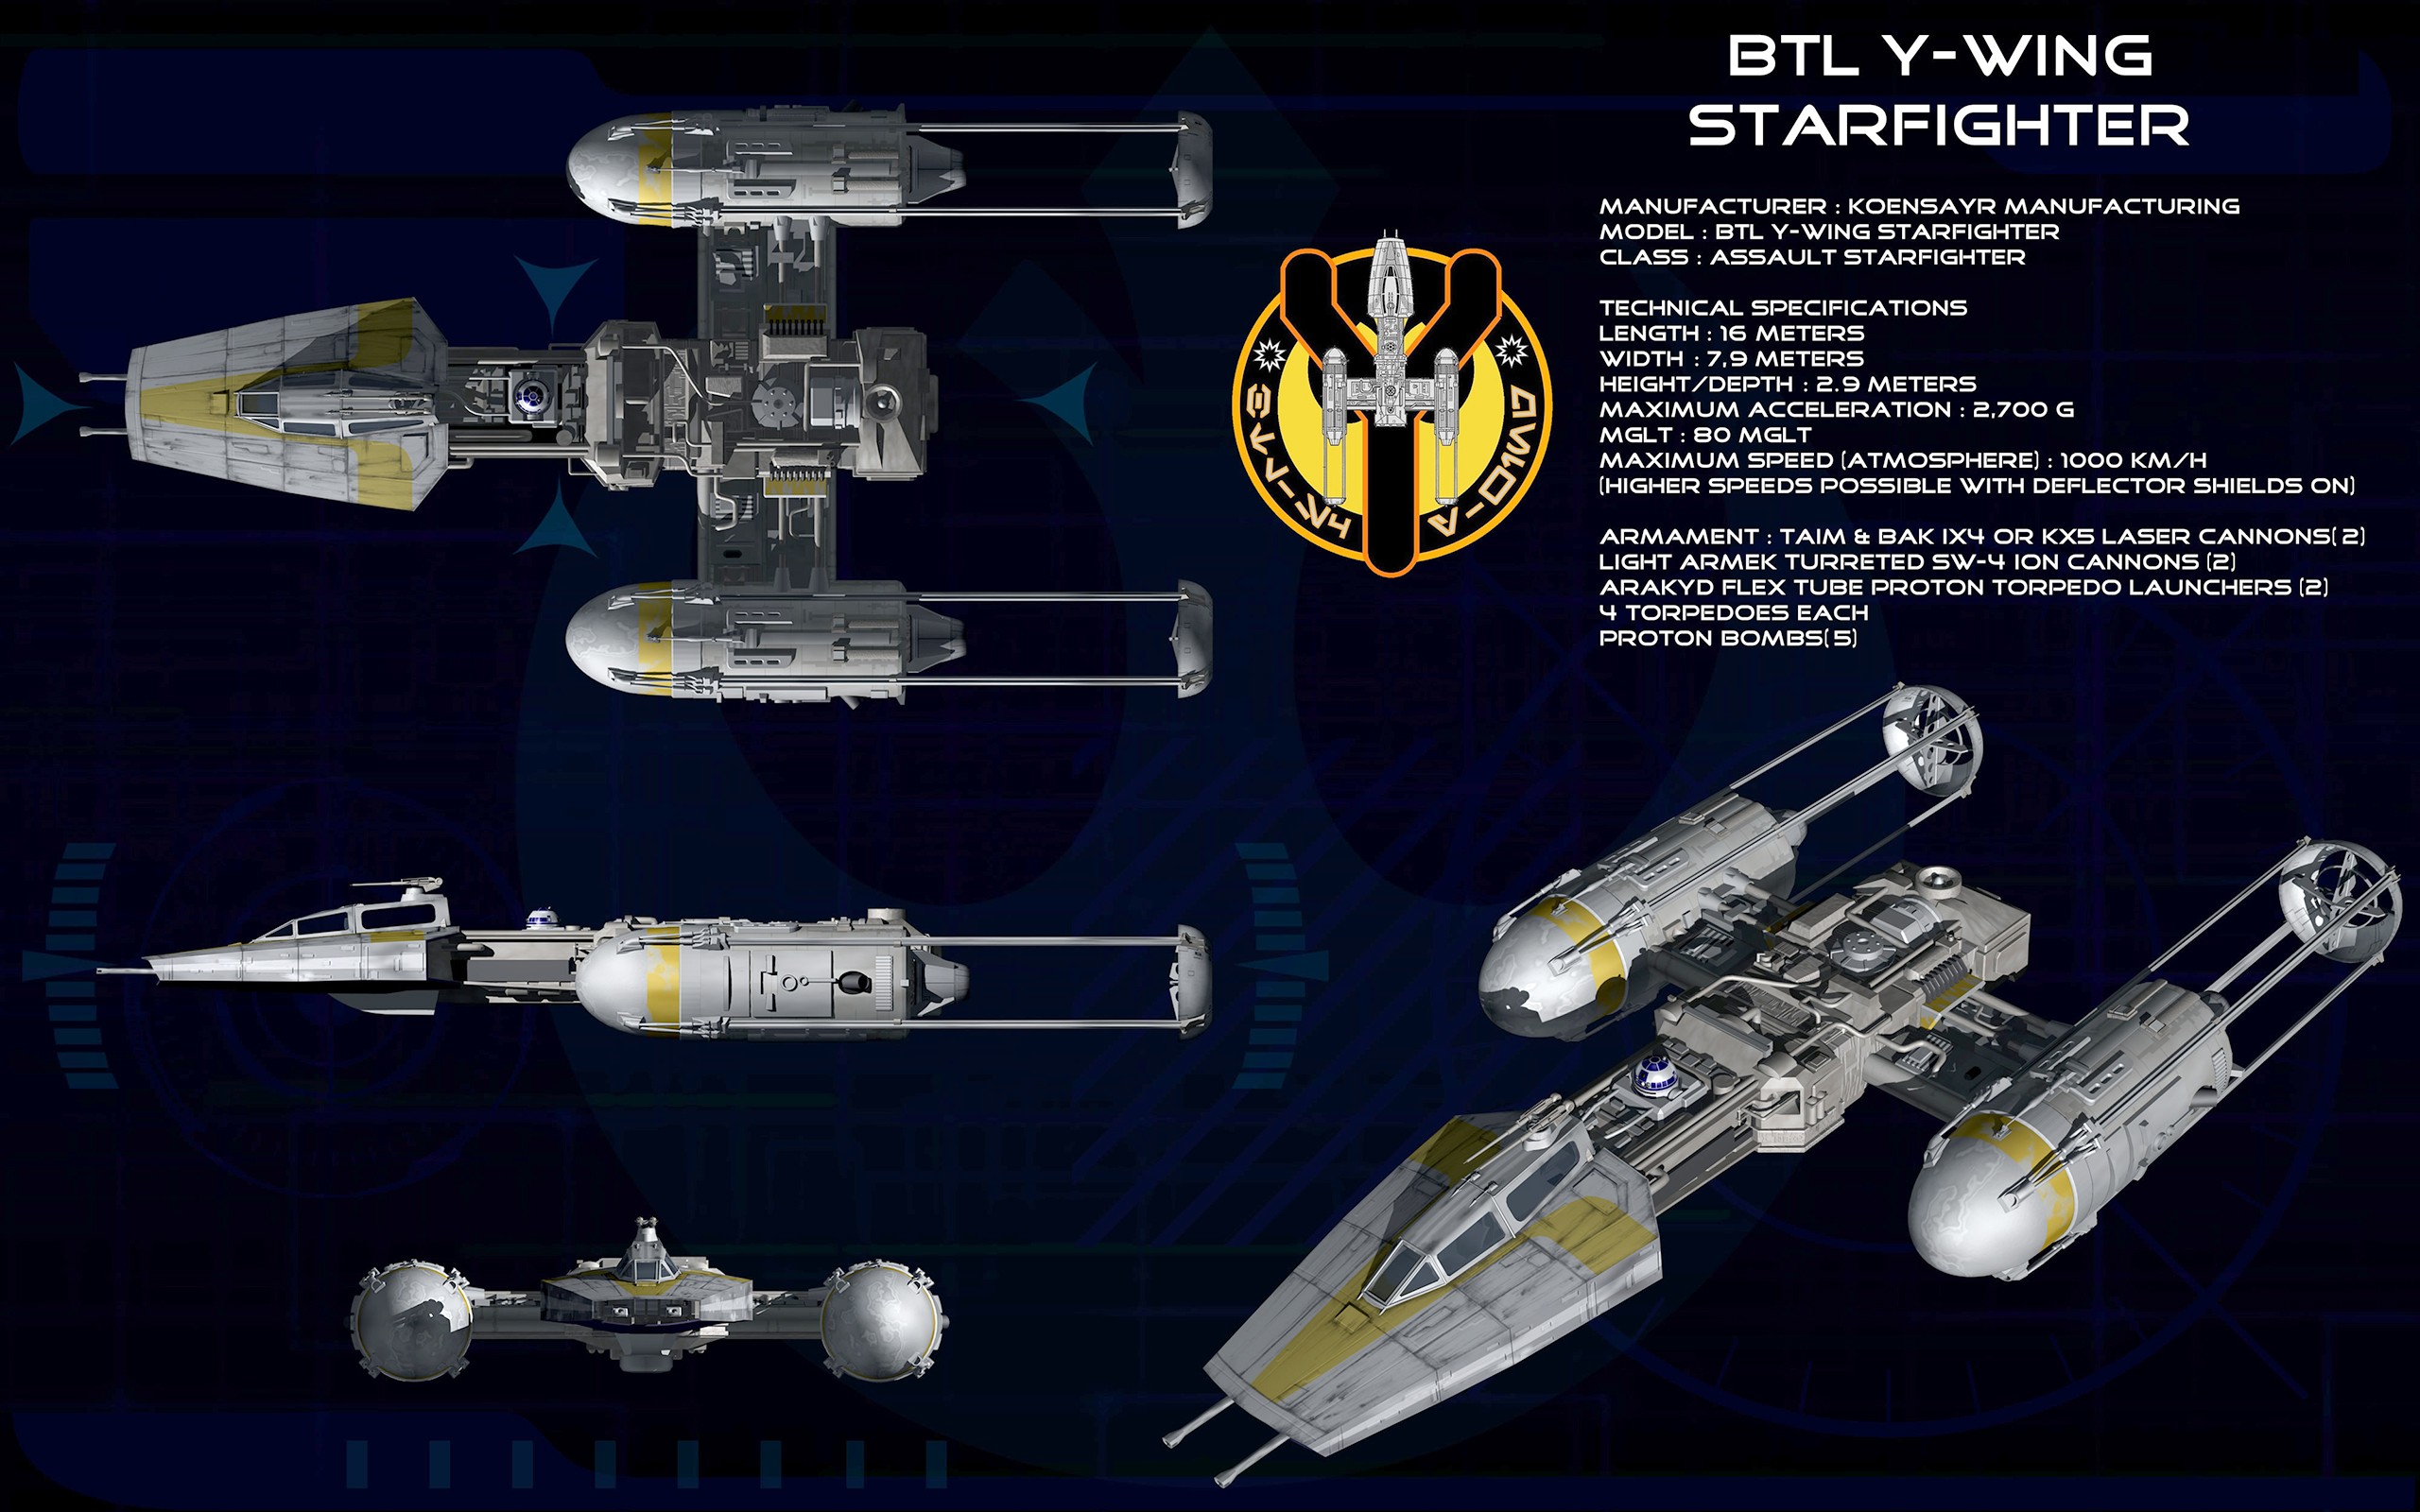 General 2560x1600 Star Wars Y-Wing infographics Star Wars Ships vehicle science fiction